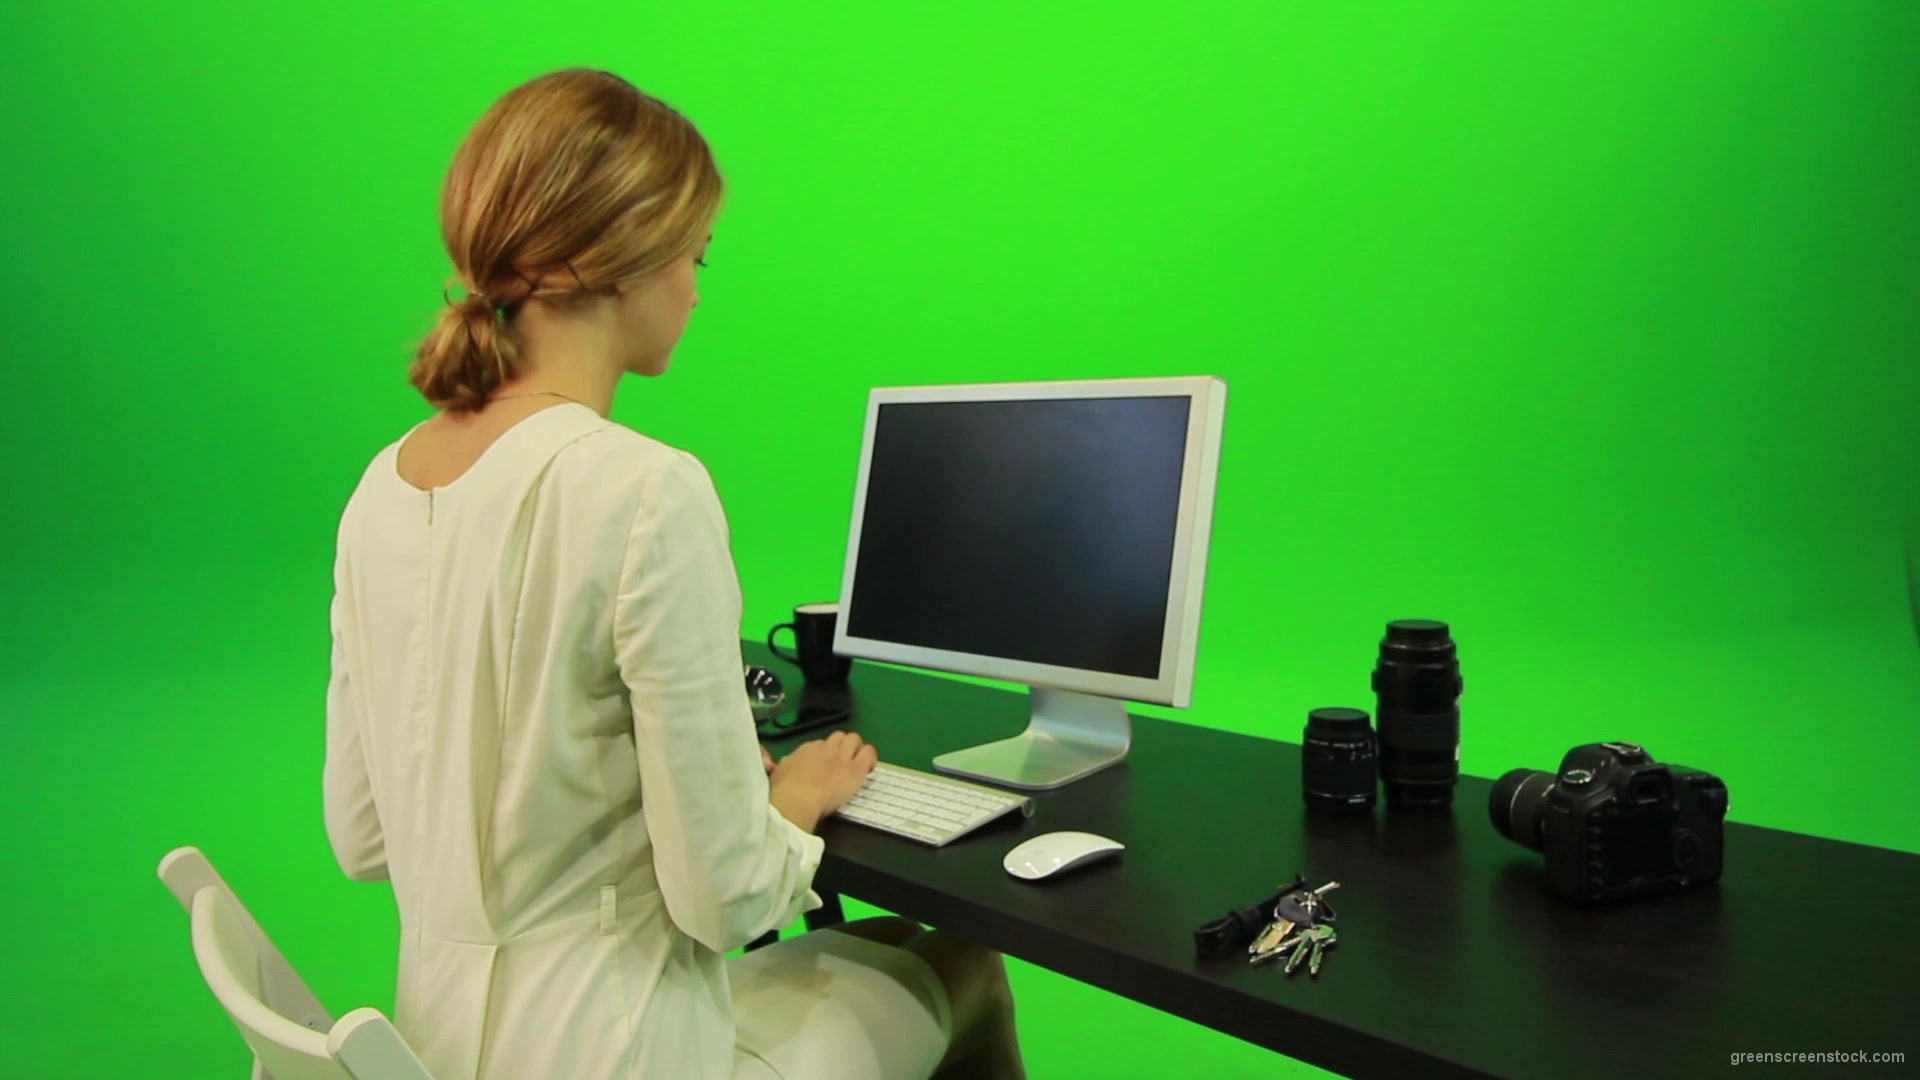 Woman-Sits-Down-and-Works-on-the-Computer-Green-Screen-Footage_008 Green Screen Stock